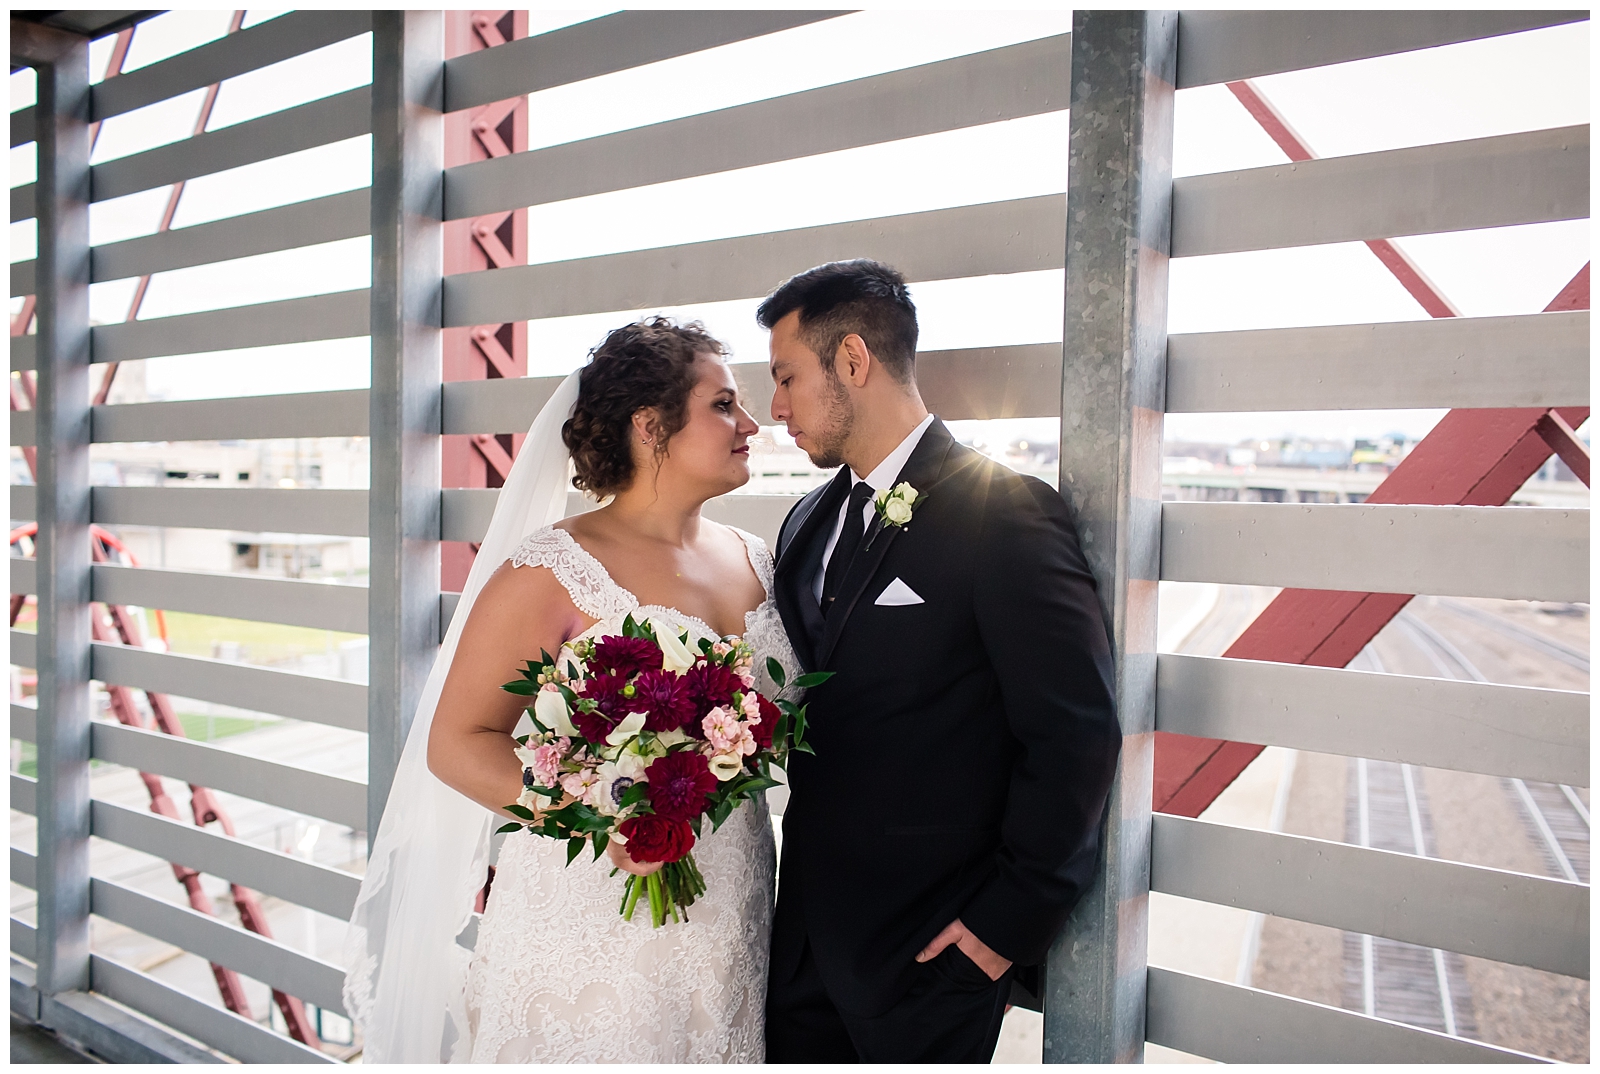 Wedding photography at Union Station by Kansas City wedding photographers Wisdom-Watson Weddings.